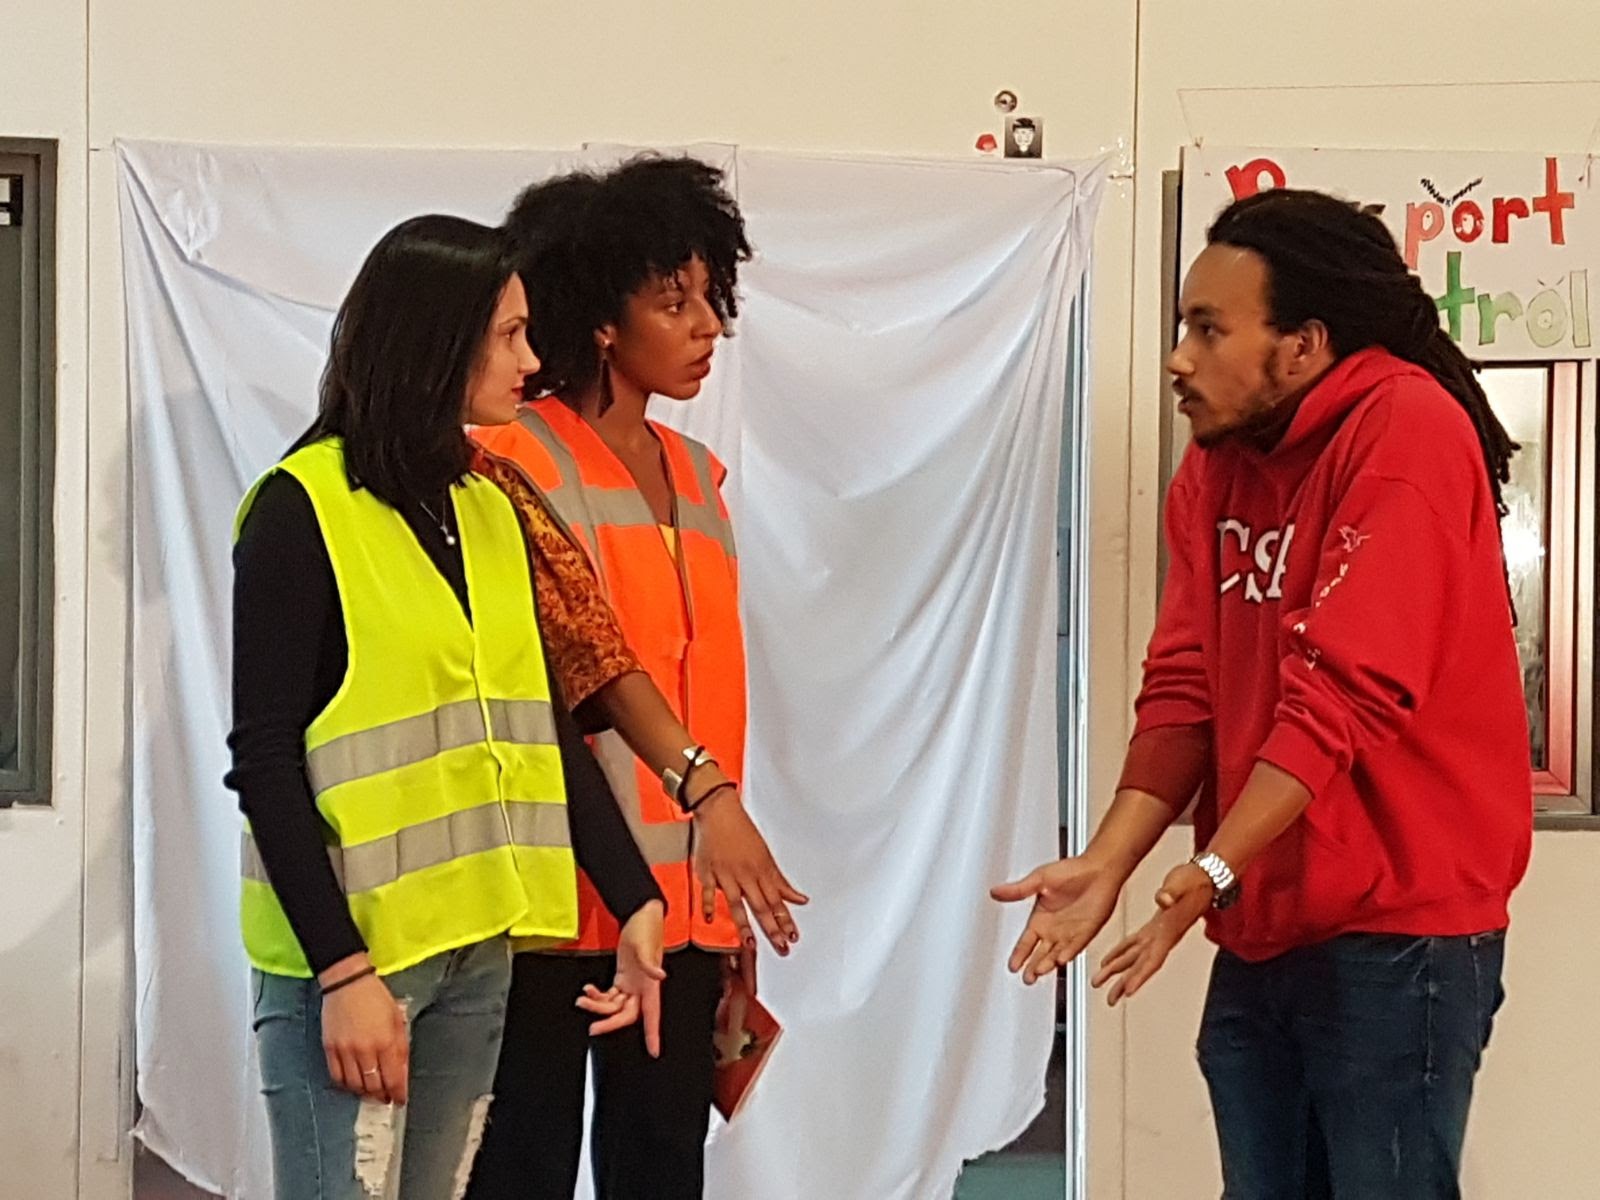 3 members of the participatory theatre